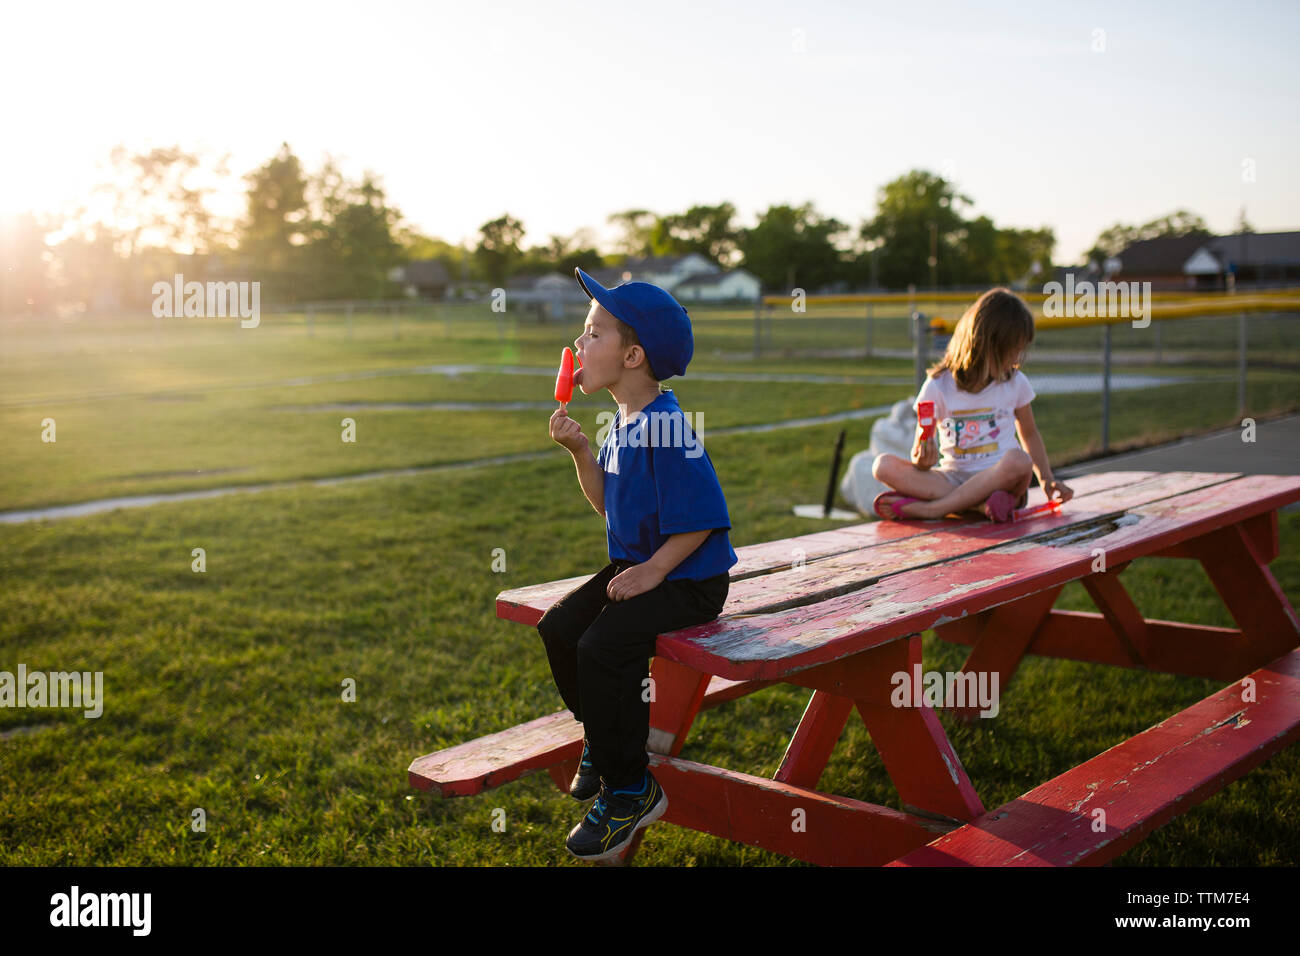 Siblings eating flavored ice while sitting on picnic bench at park Stock Photo